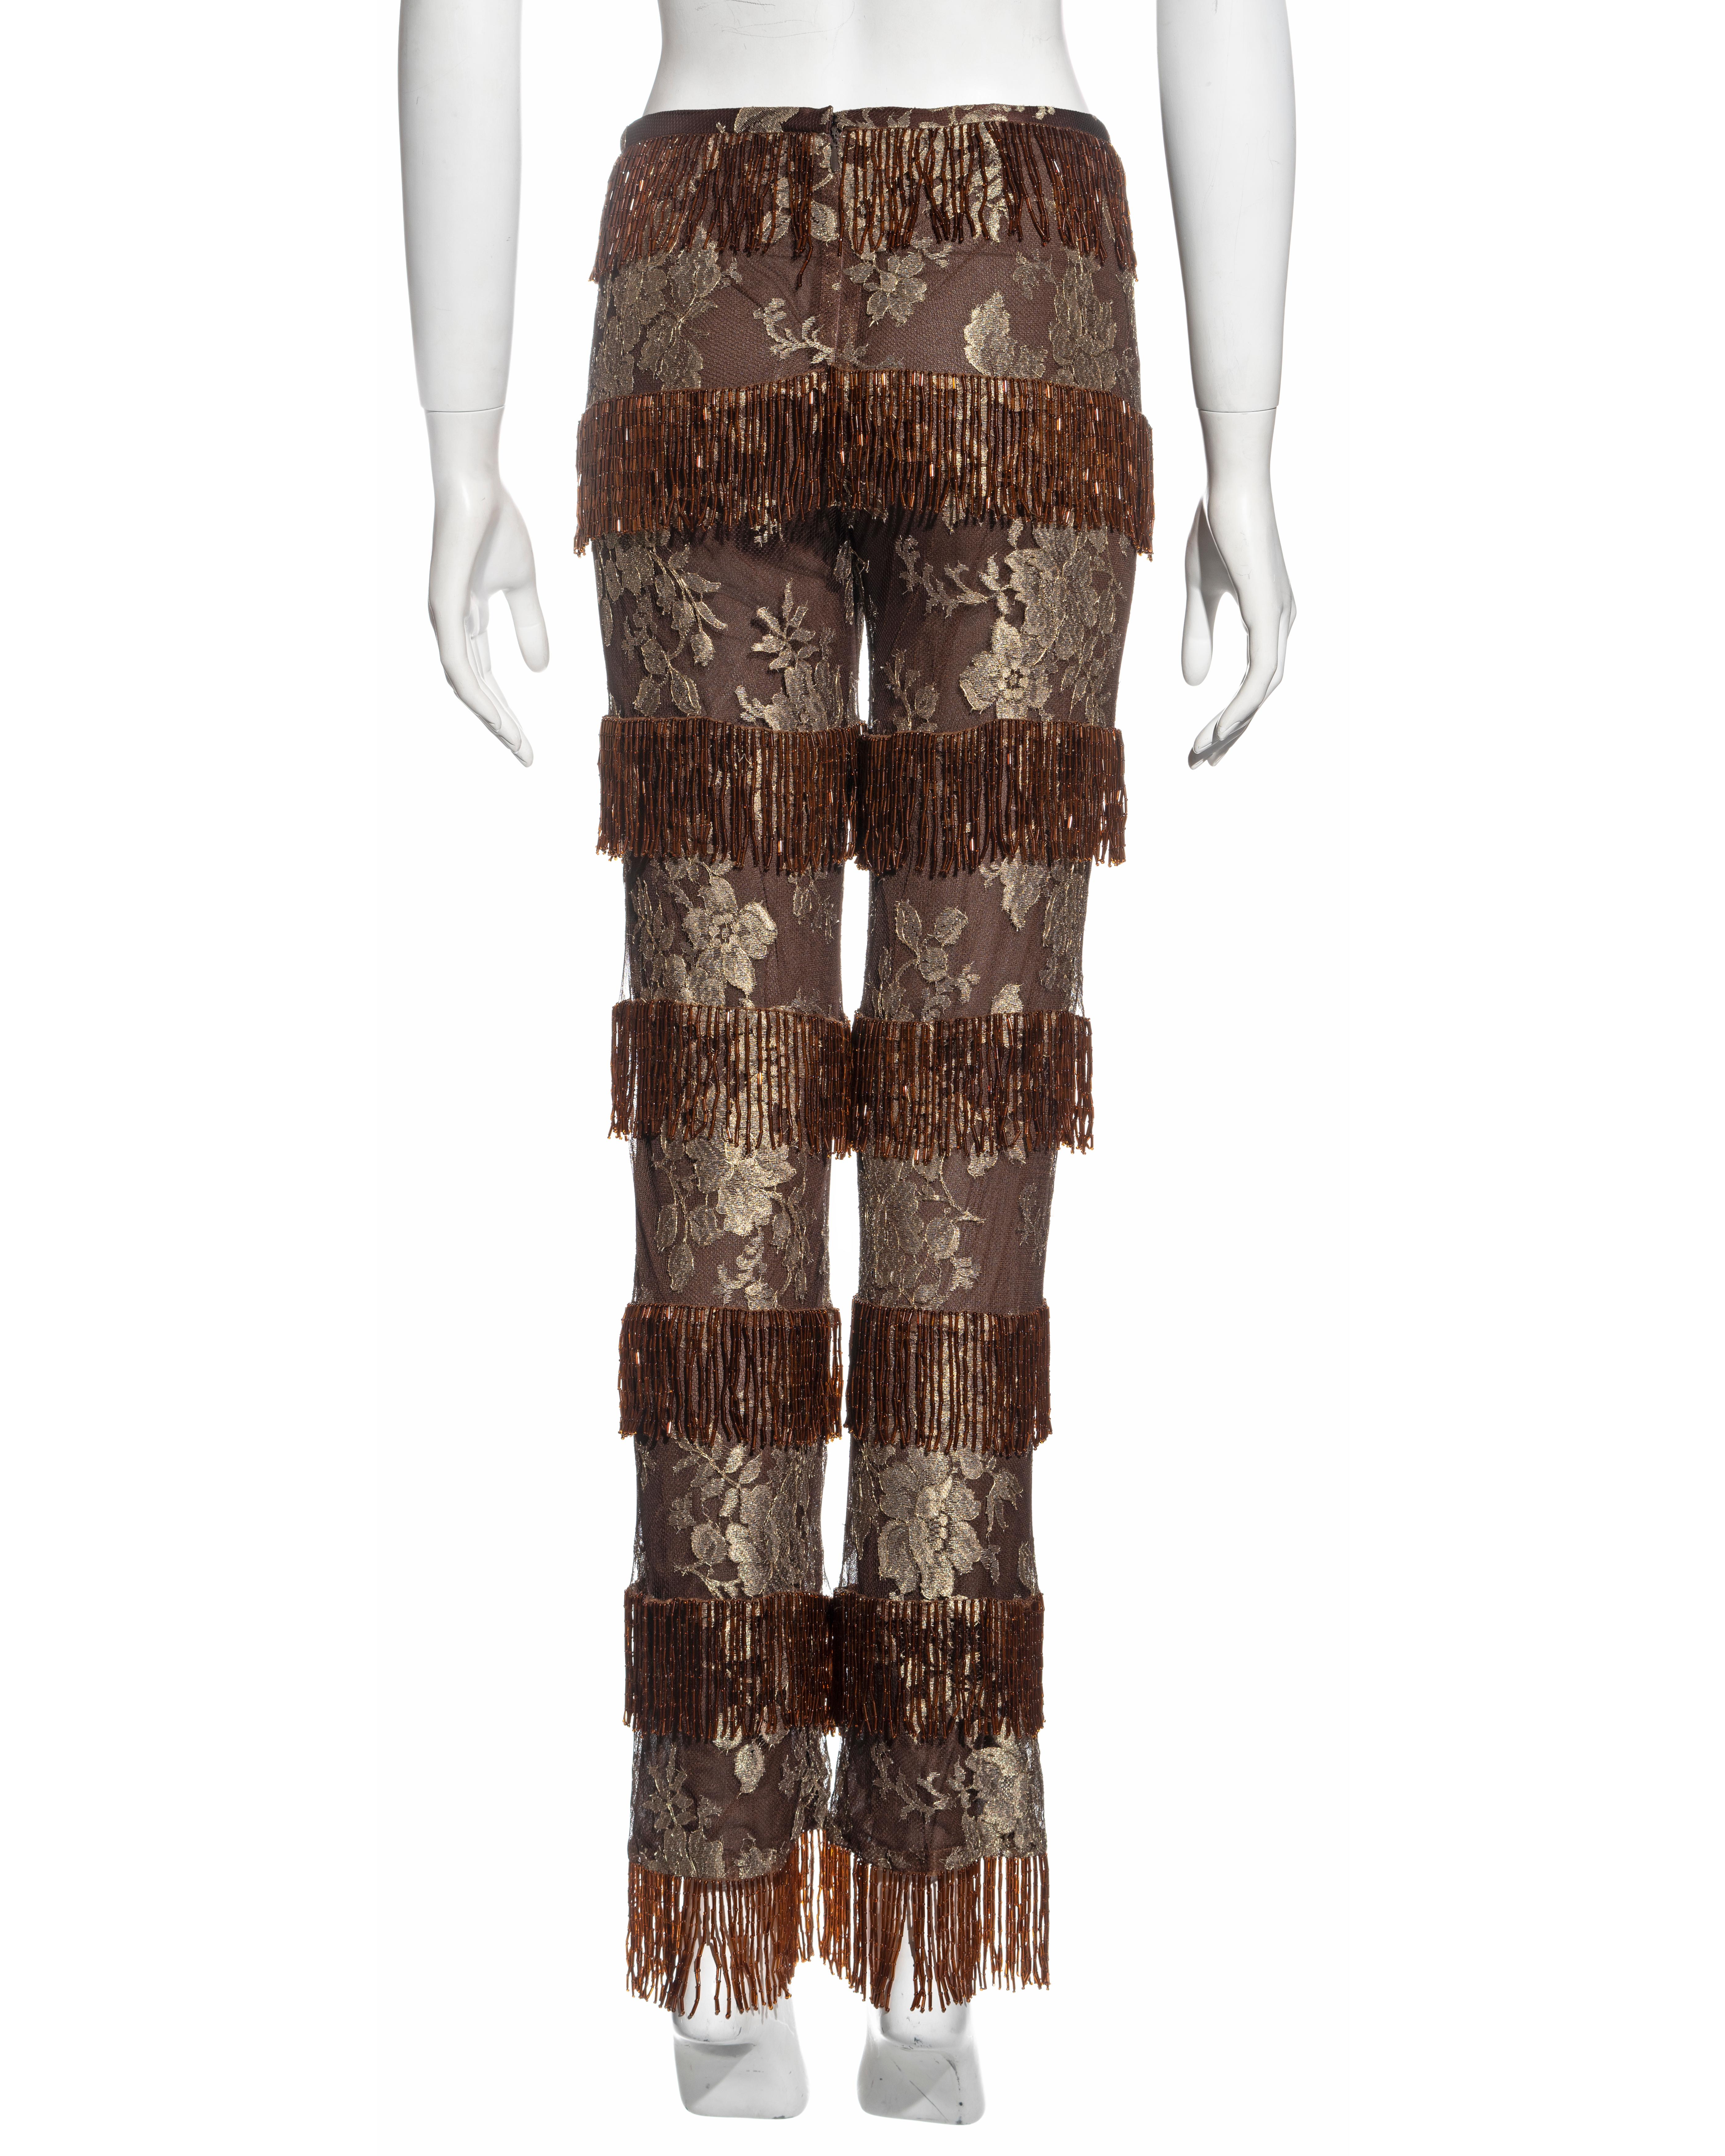 Black Dolce & Gabbana metallic gold and copper lace beaded fringe pants, ss 2000 For Sale